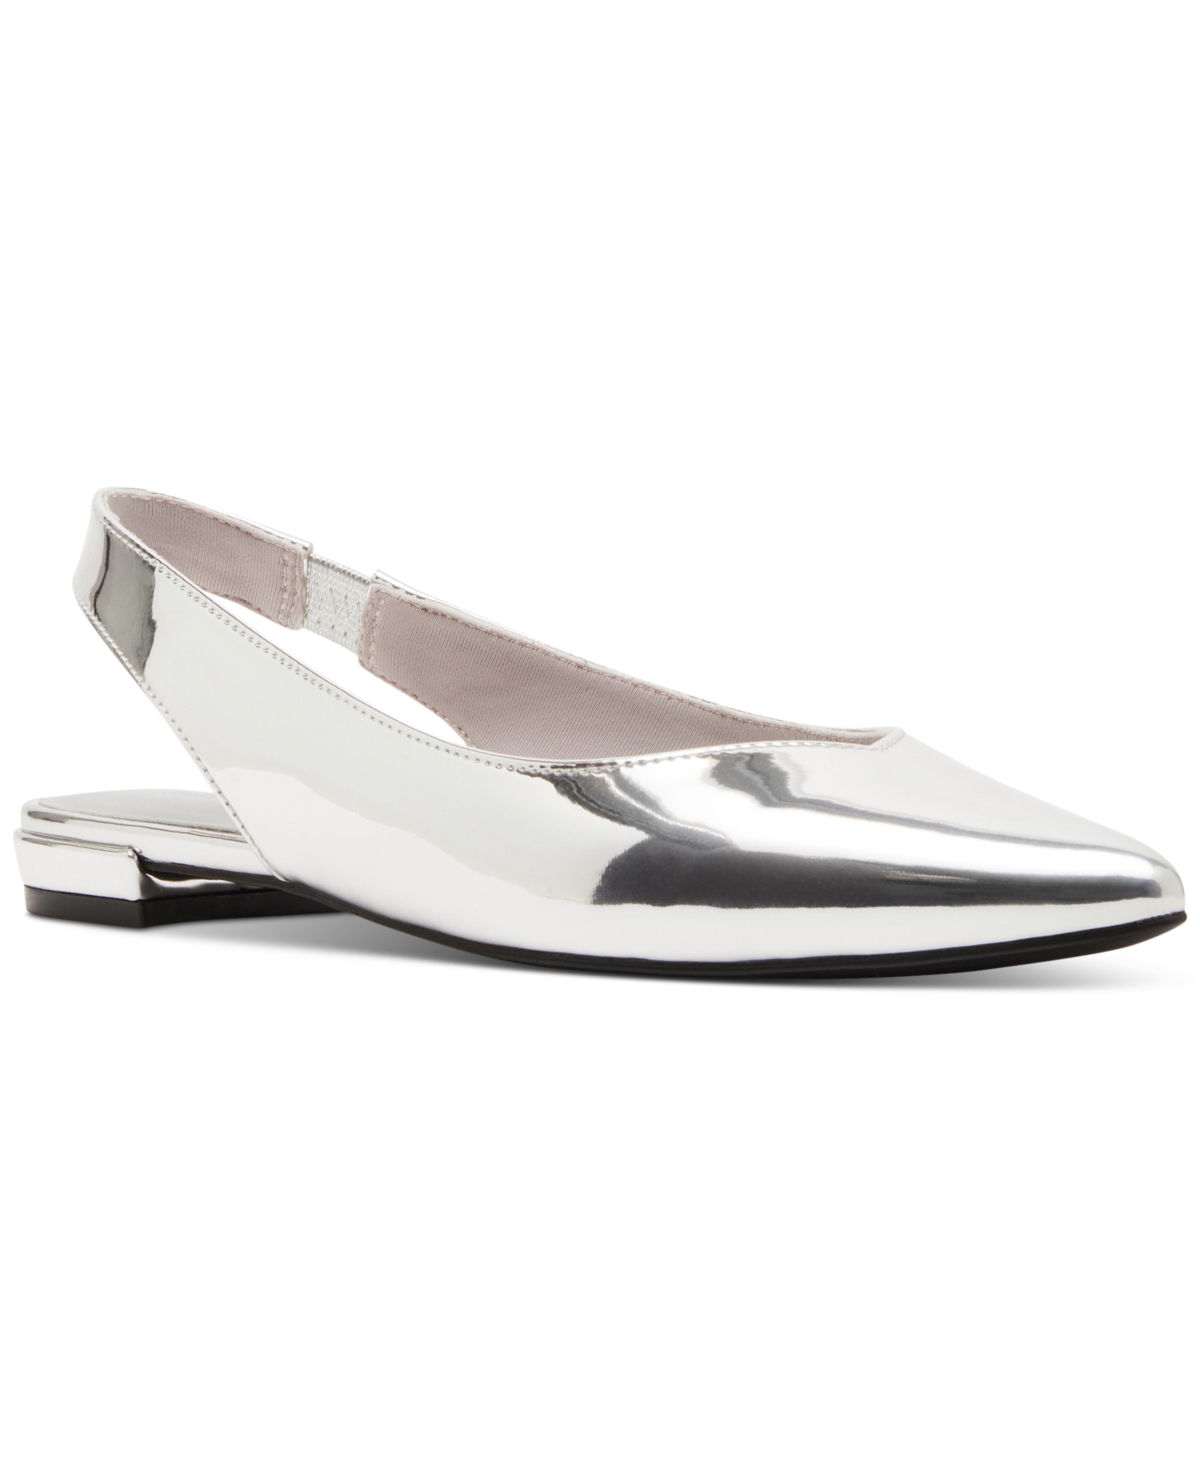 Deviin Pointed-Toe Slingback Flats - White Smooth